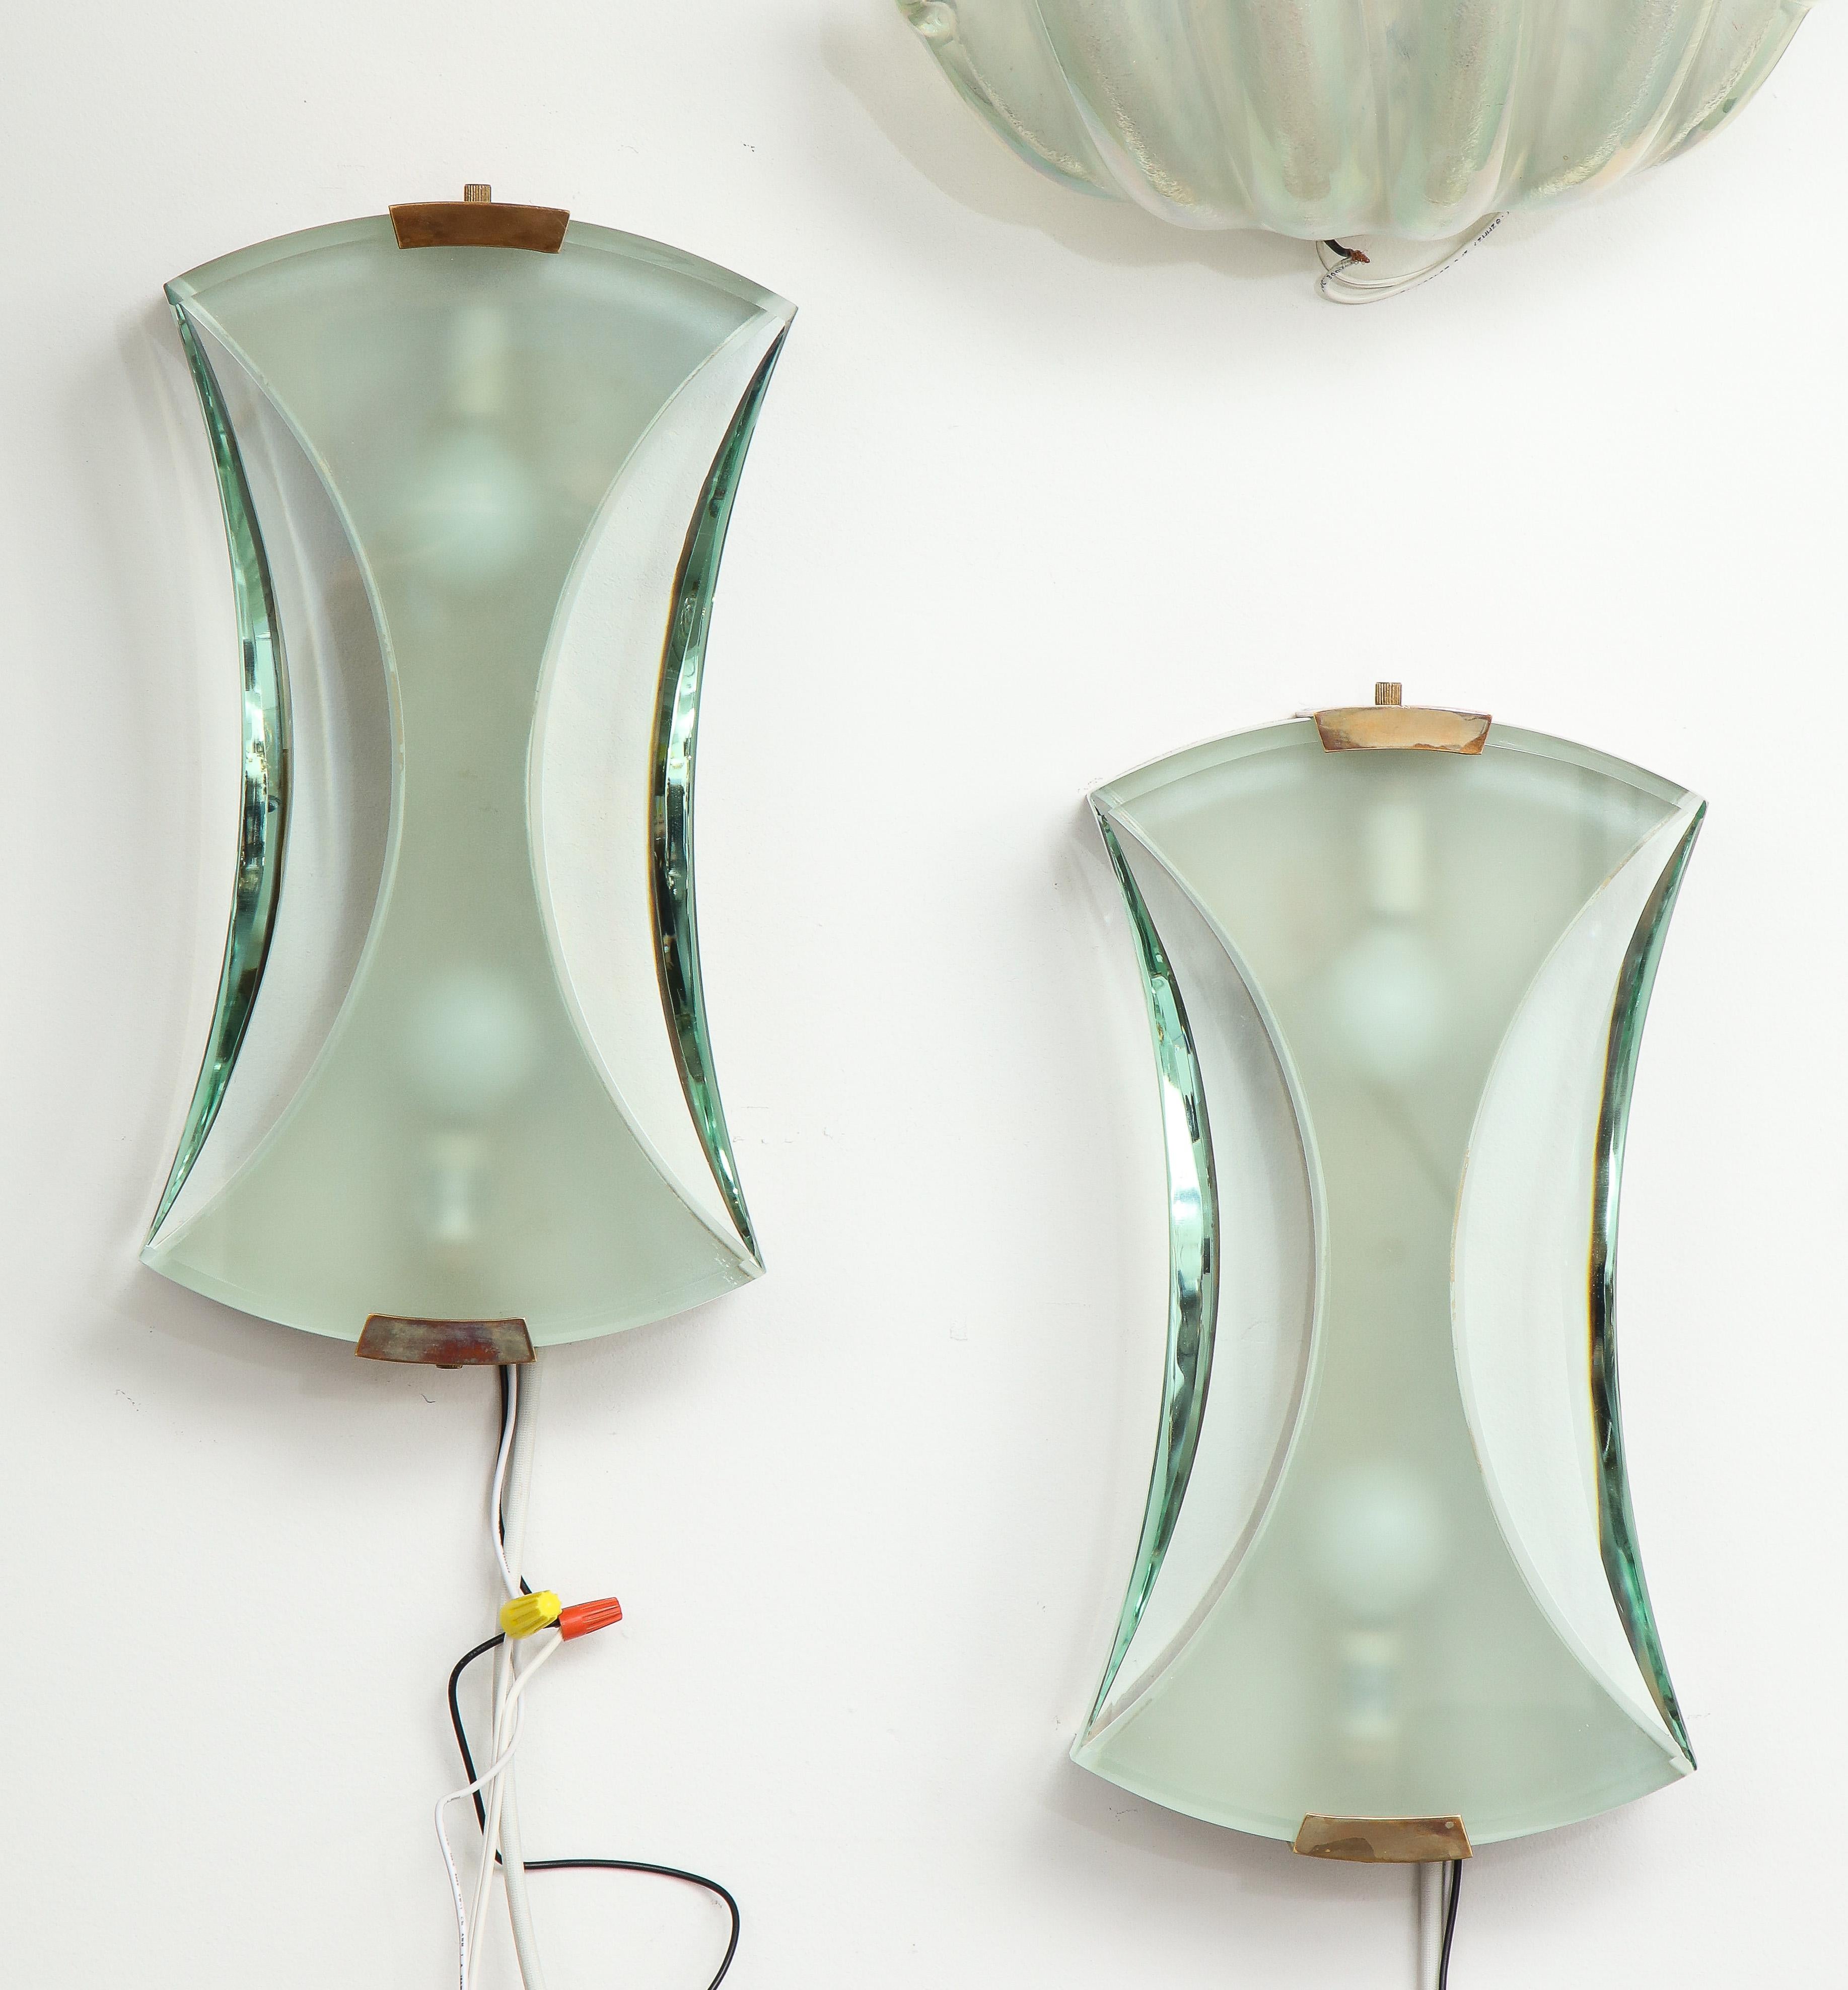 Max Ingrand for Fontana Arte elegant modernist pair of sconces model 2225 in partially frosted and clear polished glass suspended by brass fittings.
Recently rewired to U.S. standards.

Literature:
Franco Deboni, Fontana Arte: Gio Ponti, Pietro